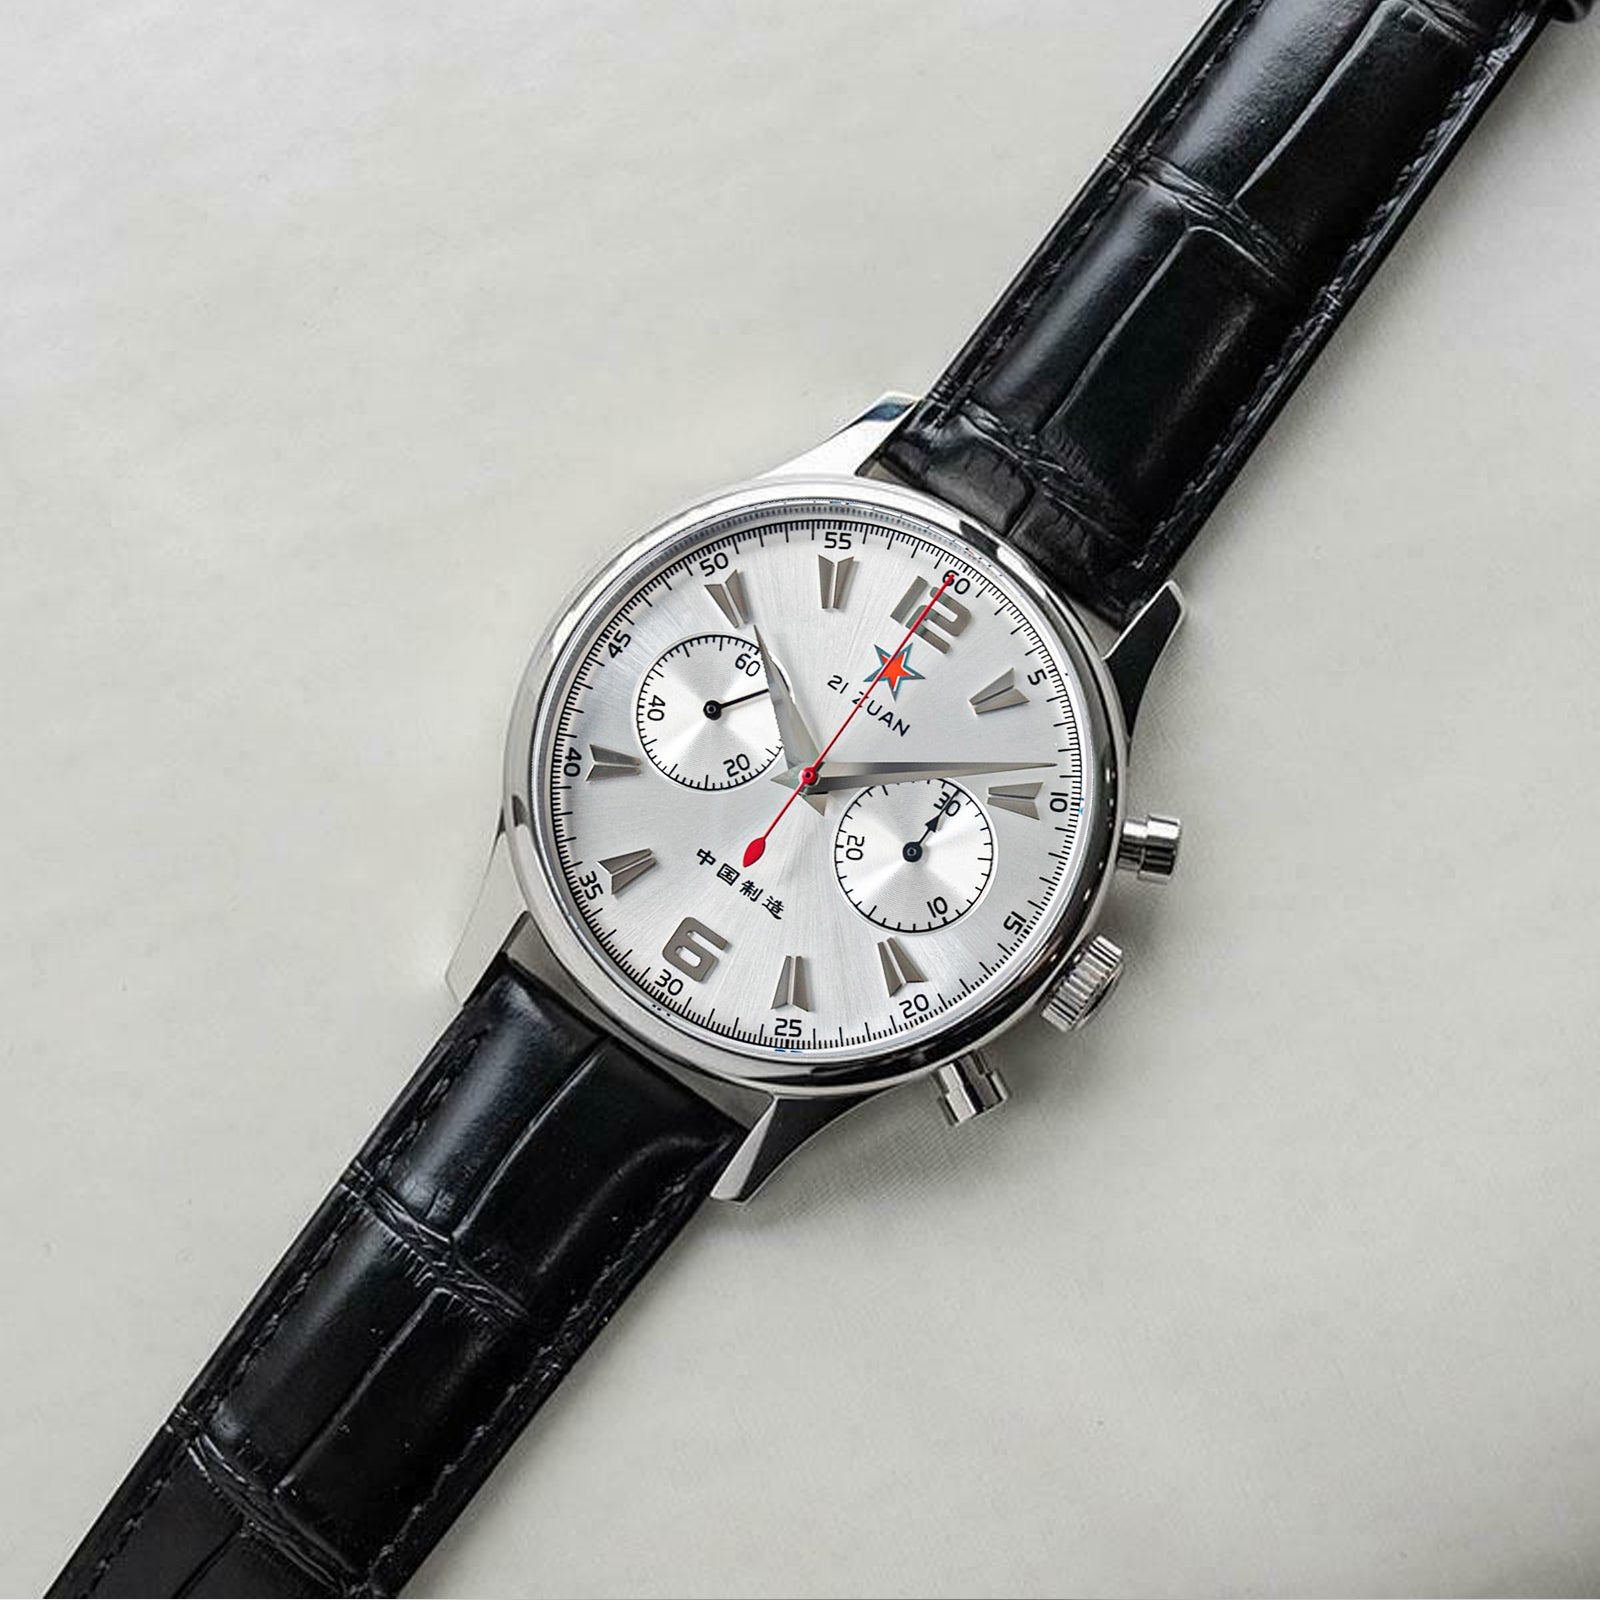 Chrono Master 438 White Dial Power Reserve Indicator – Sugess Watch